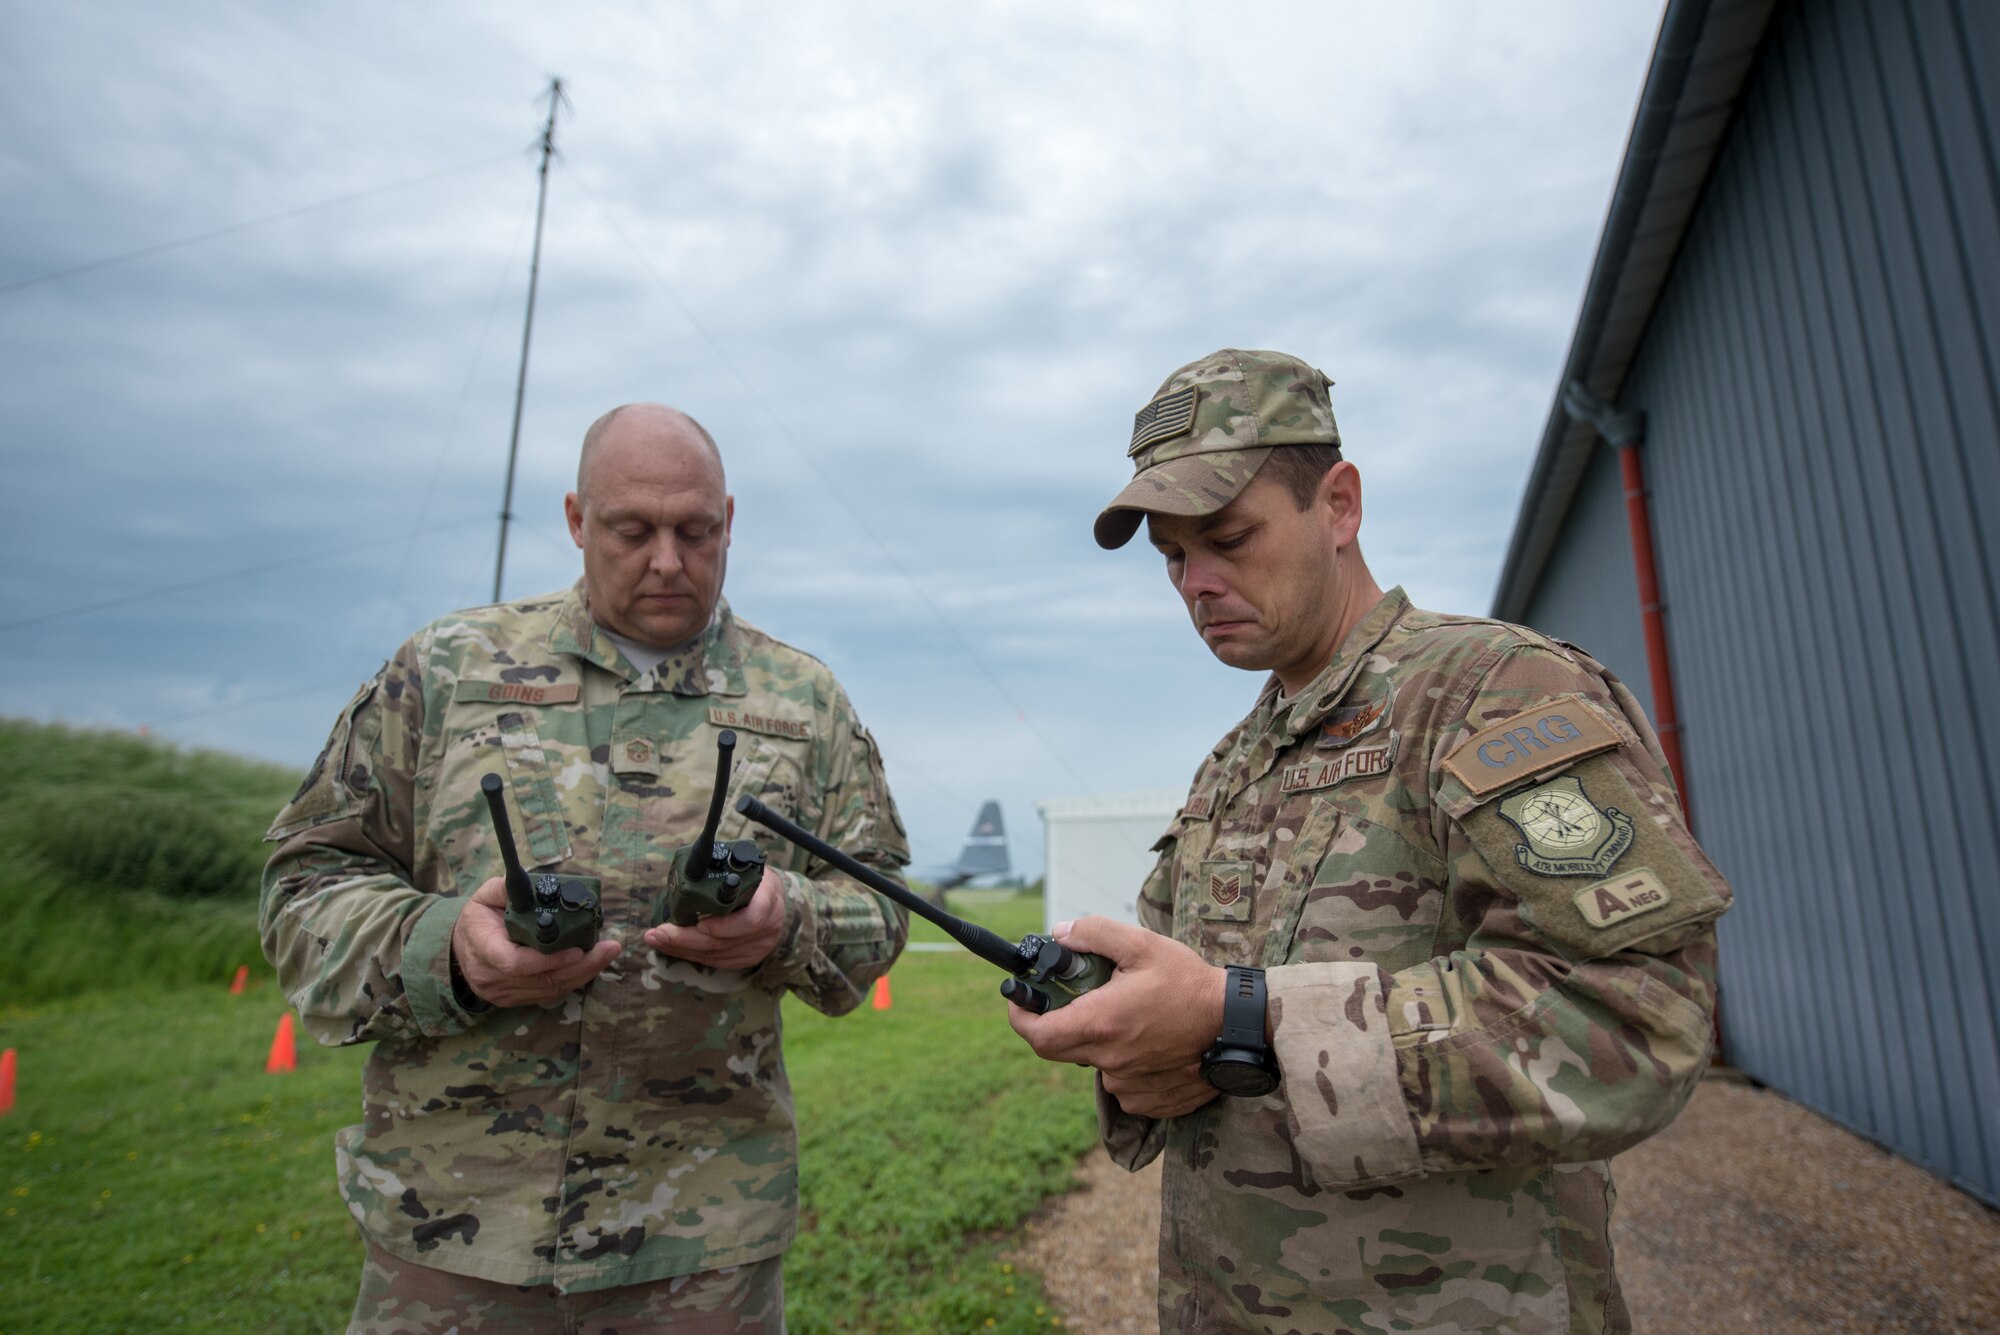 Master Sgt. Kyle Goins (left), a radio frequency transmissions technician for the Kentucky Air National Guard’s 123rd Global Mobility Squadron, and Tech. Sgt. Brian Milburn, a 123rd GMS loadmaster, check radio frequencies at Évreux-Fauville Air Base in Évreux, France, June 4, 2019. Two C-130s and more than 30 Airmen from the Kentucky Air Guard’s 123rd Airlift Wing deployed from their base in Louisville, Ky., to participate in aerial events over Normandy, France, for the 75th anniversary of D-Day. The D-Day invasion, formally known as Operation Overlord, turned the tide of World War II in the European theater. (U.S. Air National Guard photo by Phil Speck)